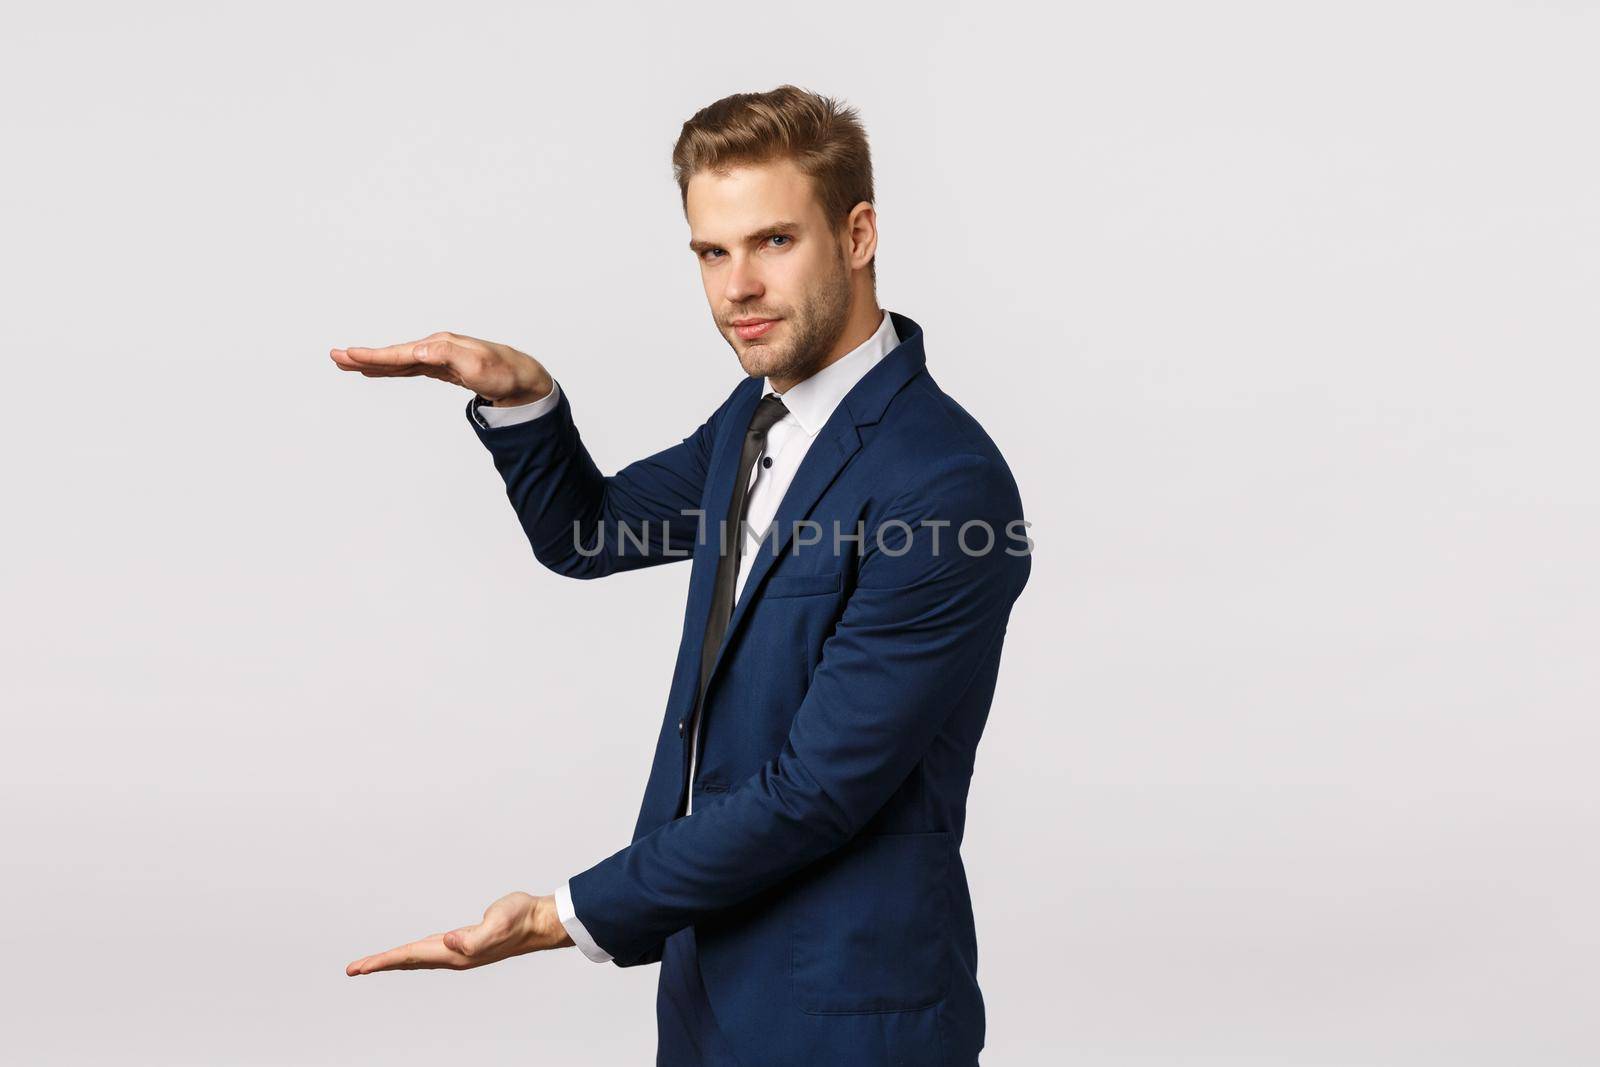 Man showing something big. Attractive bearded blond businessman in classic suit, hold hand as holding something, shaping large object, diagram, showing amount money can gain, white background.